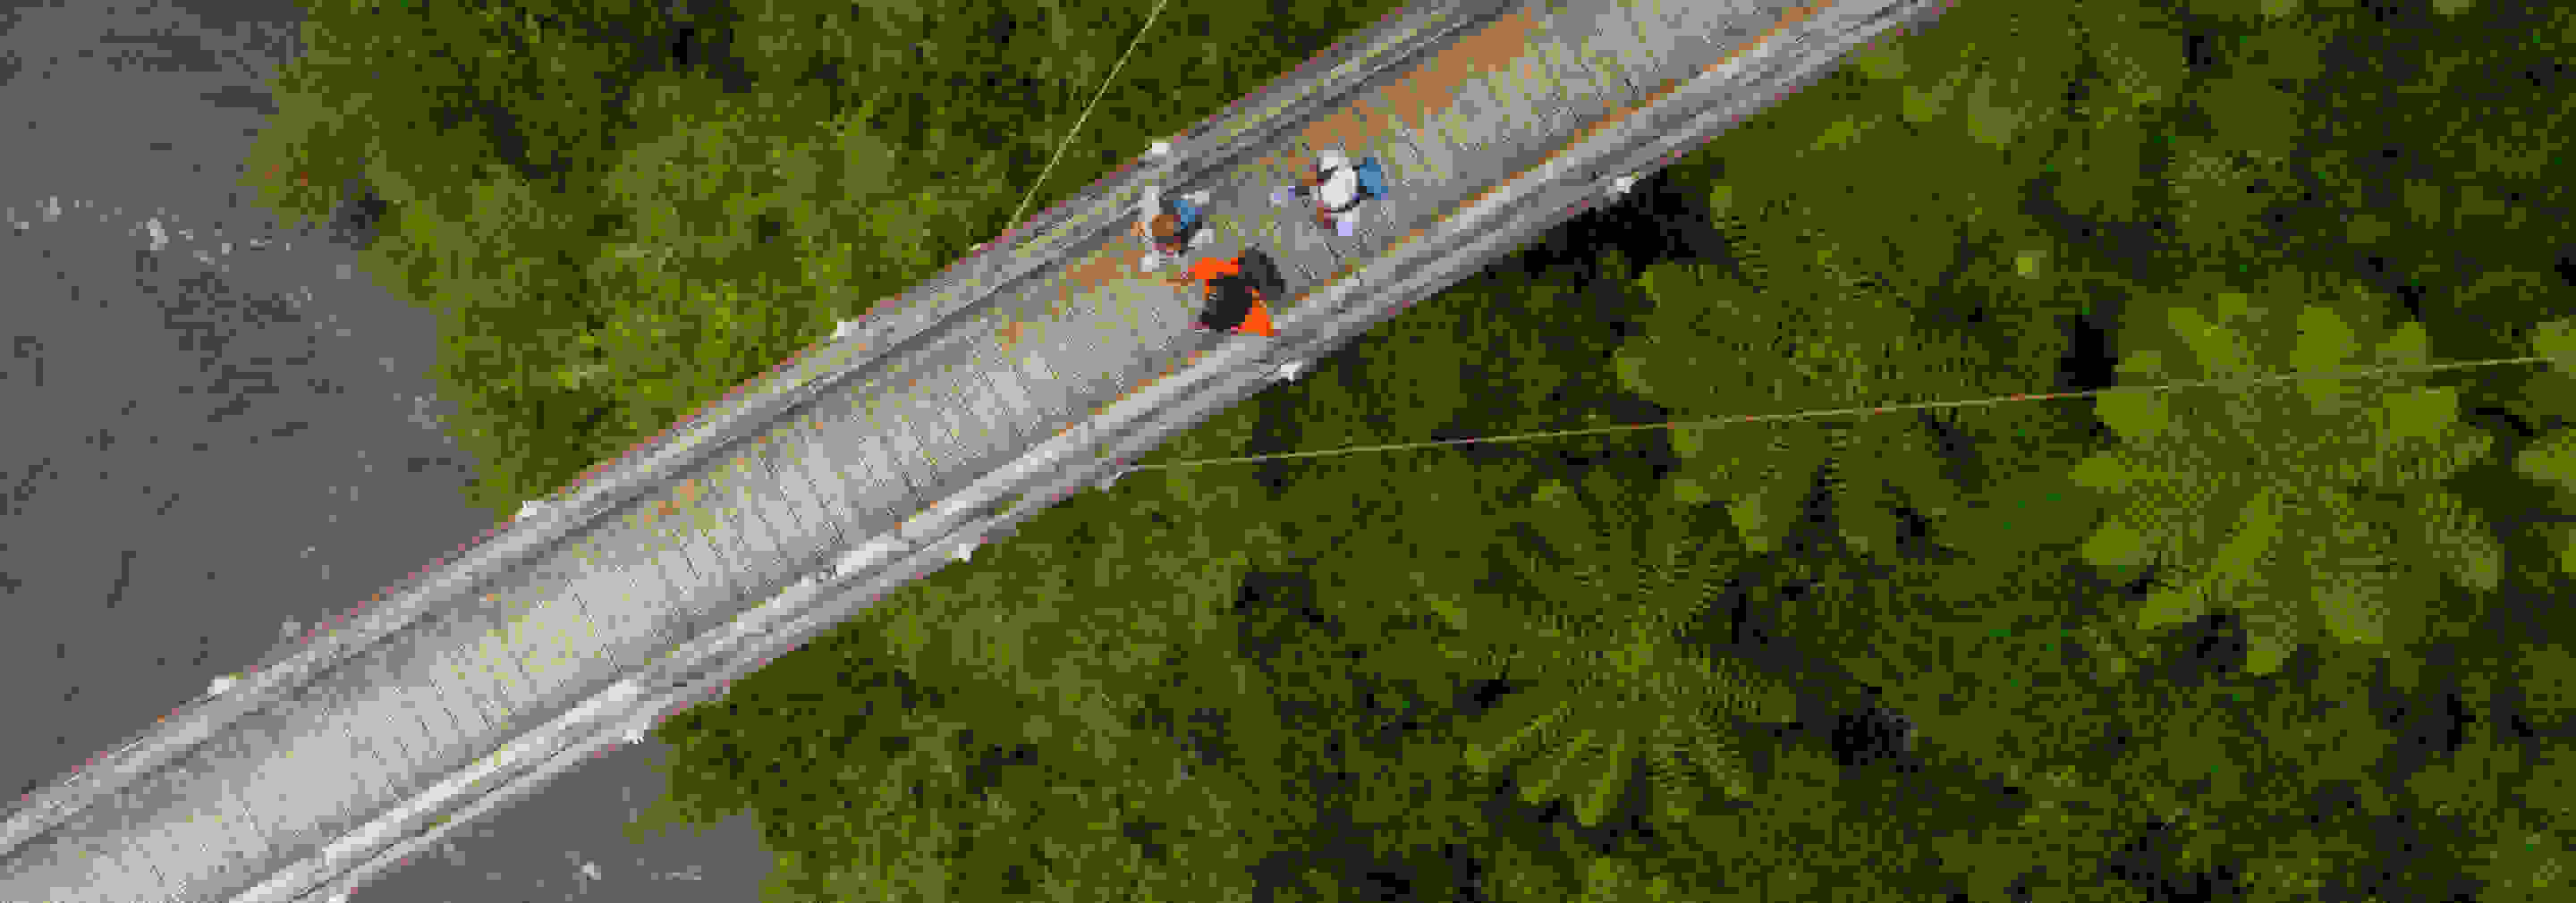 A top down drone shot of a group of people on a bridge in the middle of a forest